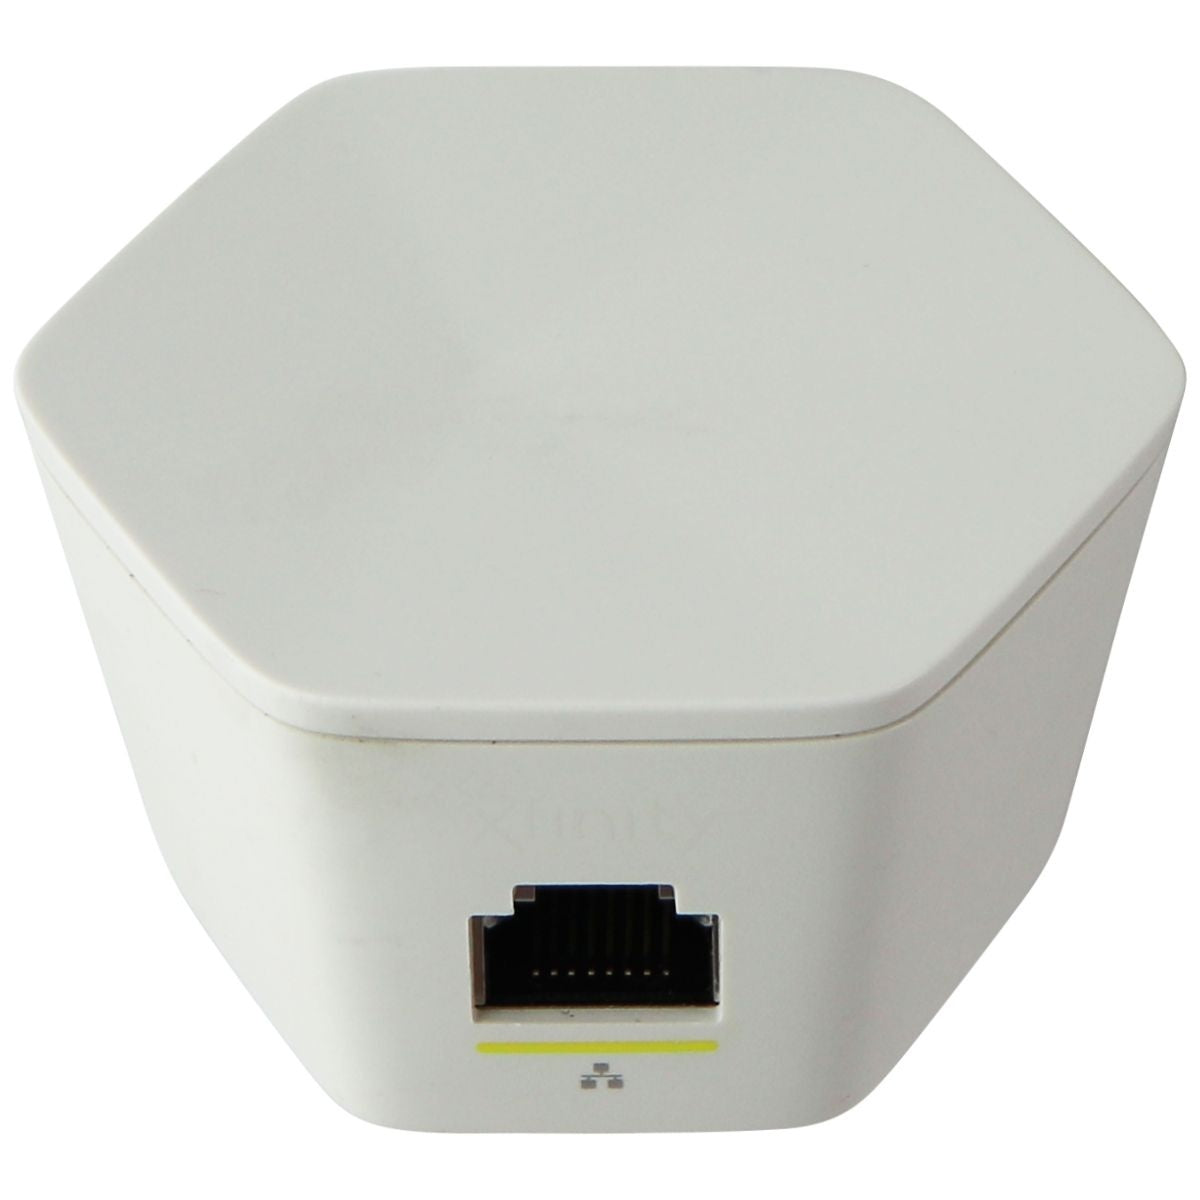 Xfinity A1A Comcast Xfi Pod Wi-Fi Range Extender Plug - White (XE1-S A1A) Networking - Boosters, Extenders & Antennas Xfinity    - Simple Cell Bulk Wholesale Pricing - USA Seller